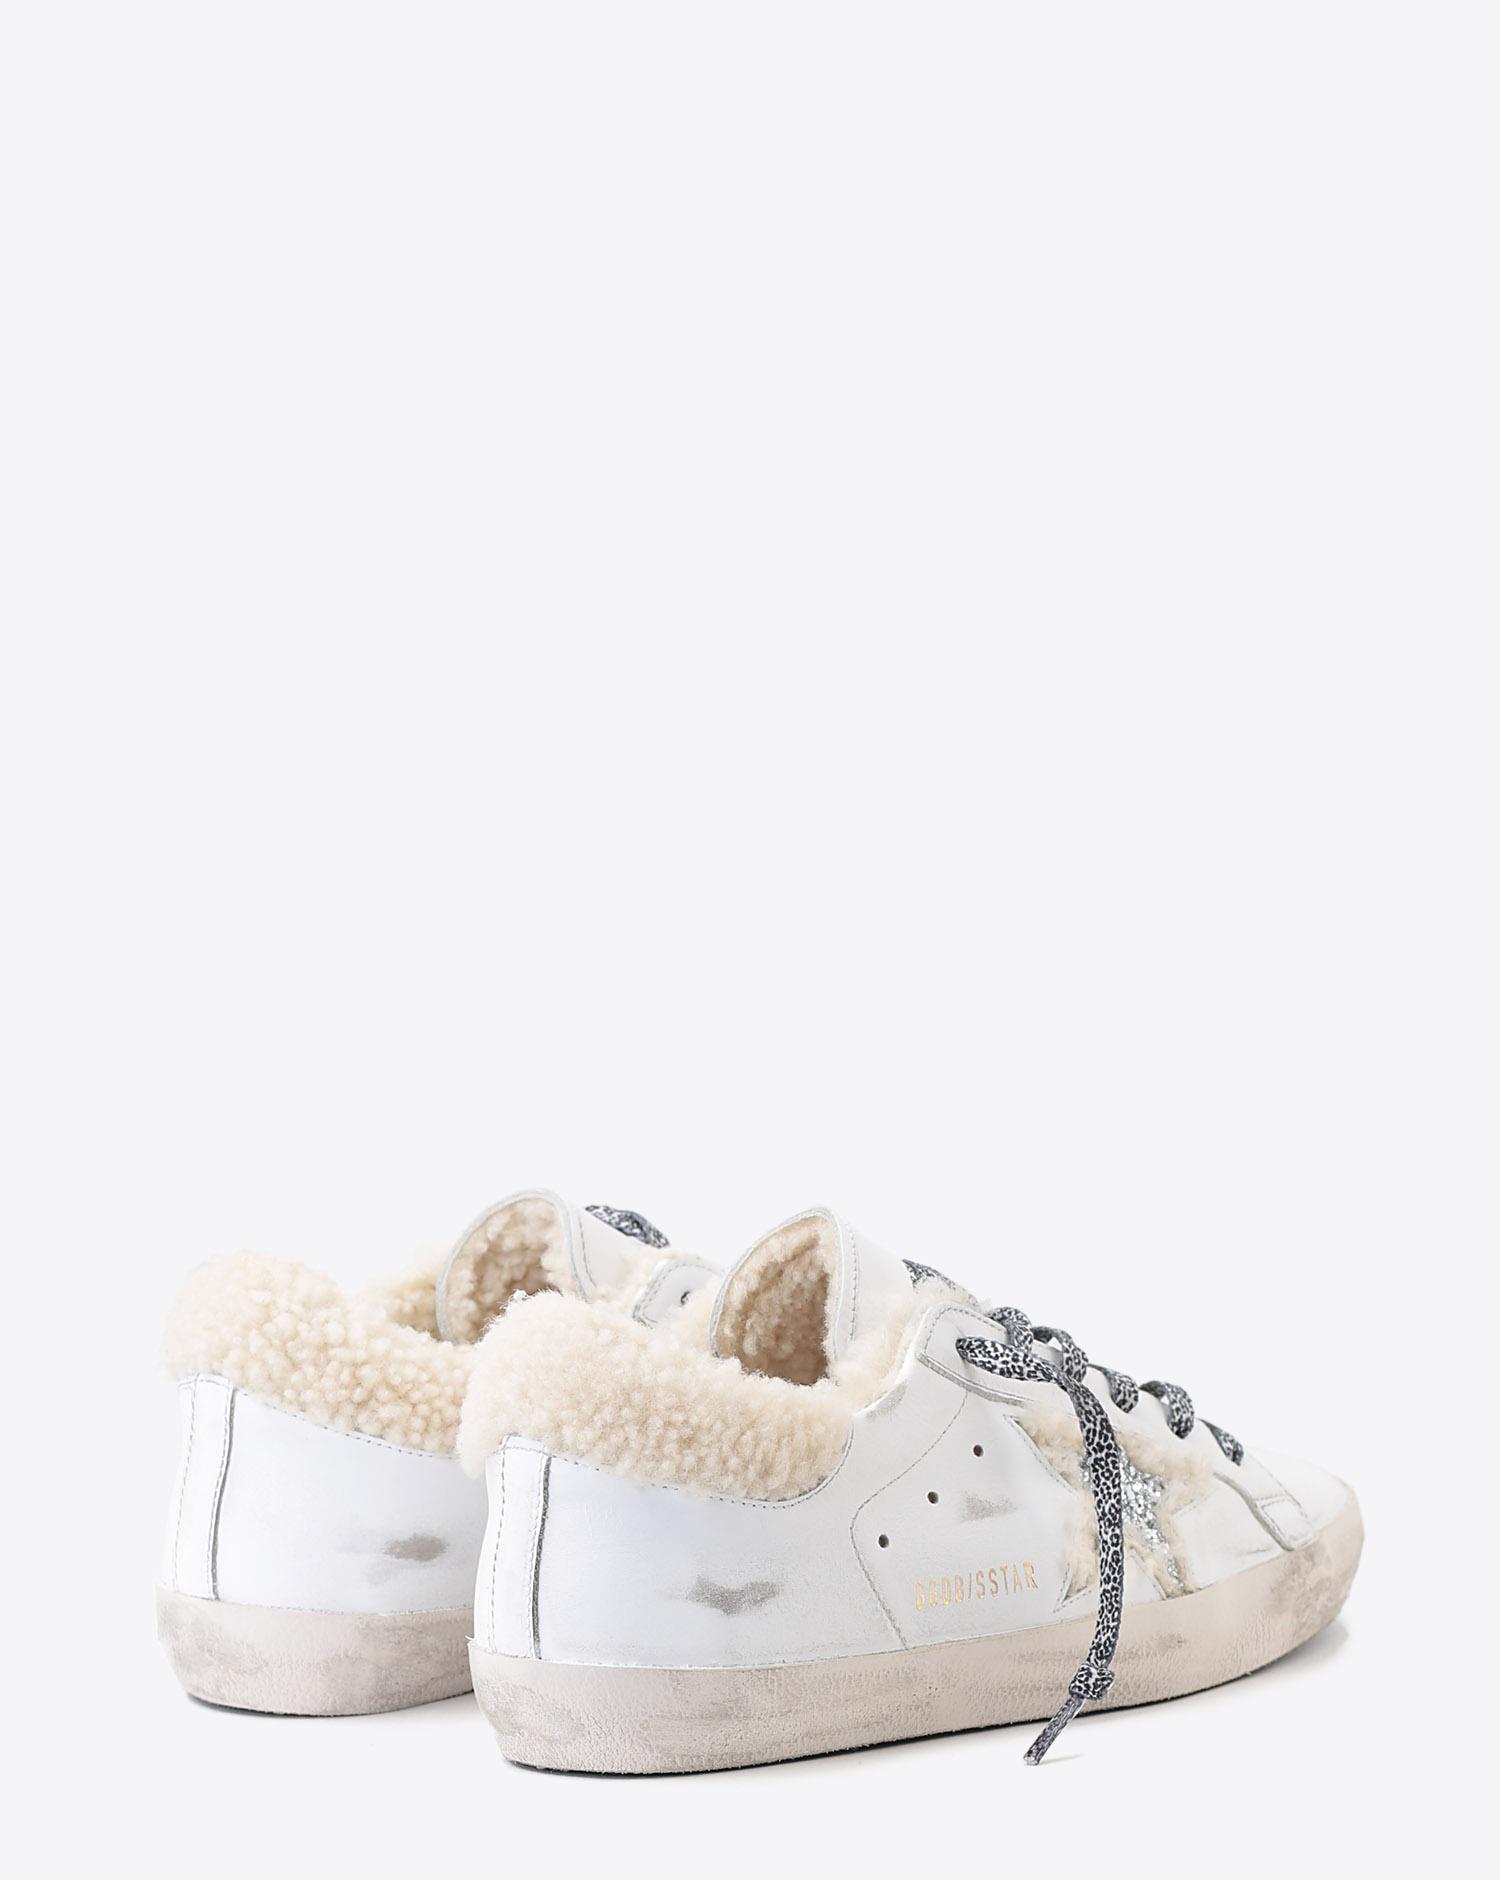 Golden Goose Woman Pré-Collection Sneakers Superstar - White Shearling- Silver Glitter Star  